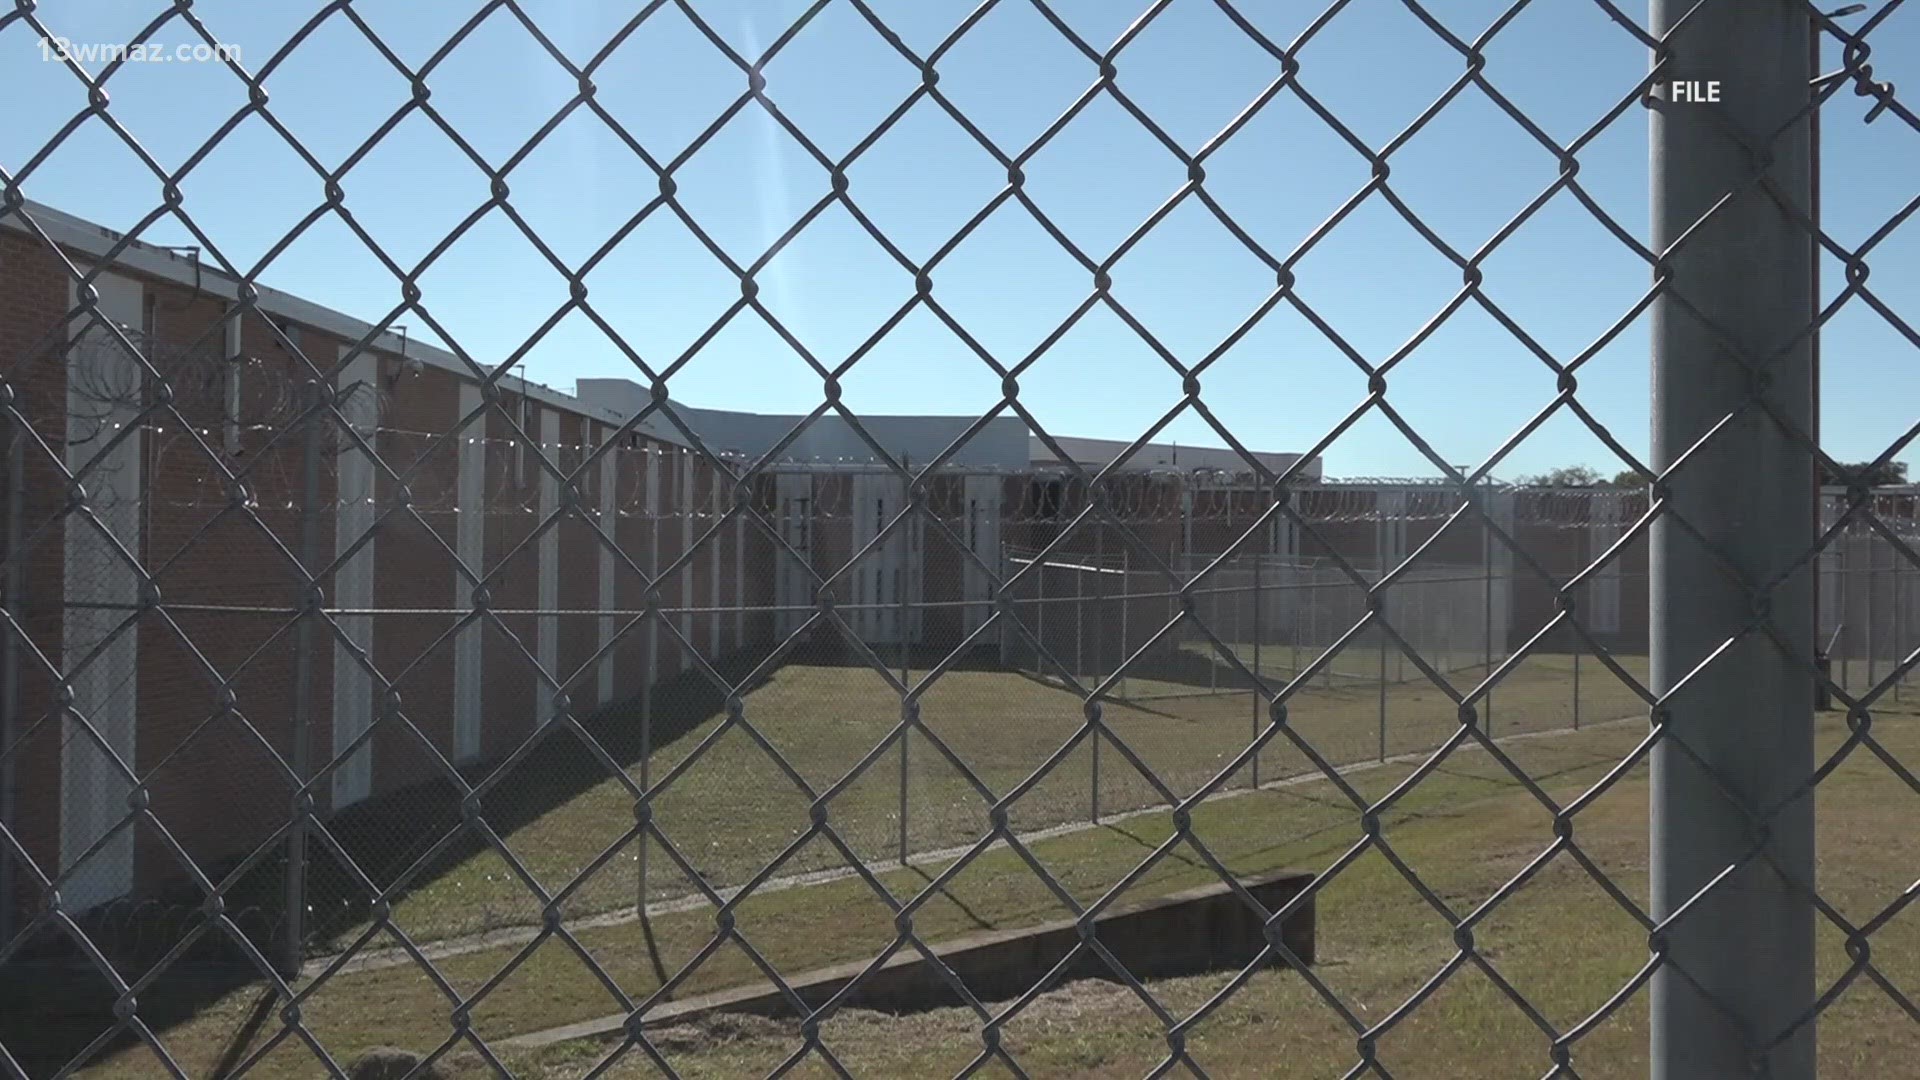 We answered many of the questions that YOU have asked about the breakout from the Bibb County Jail